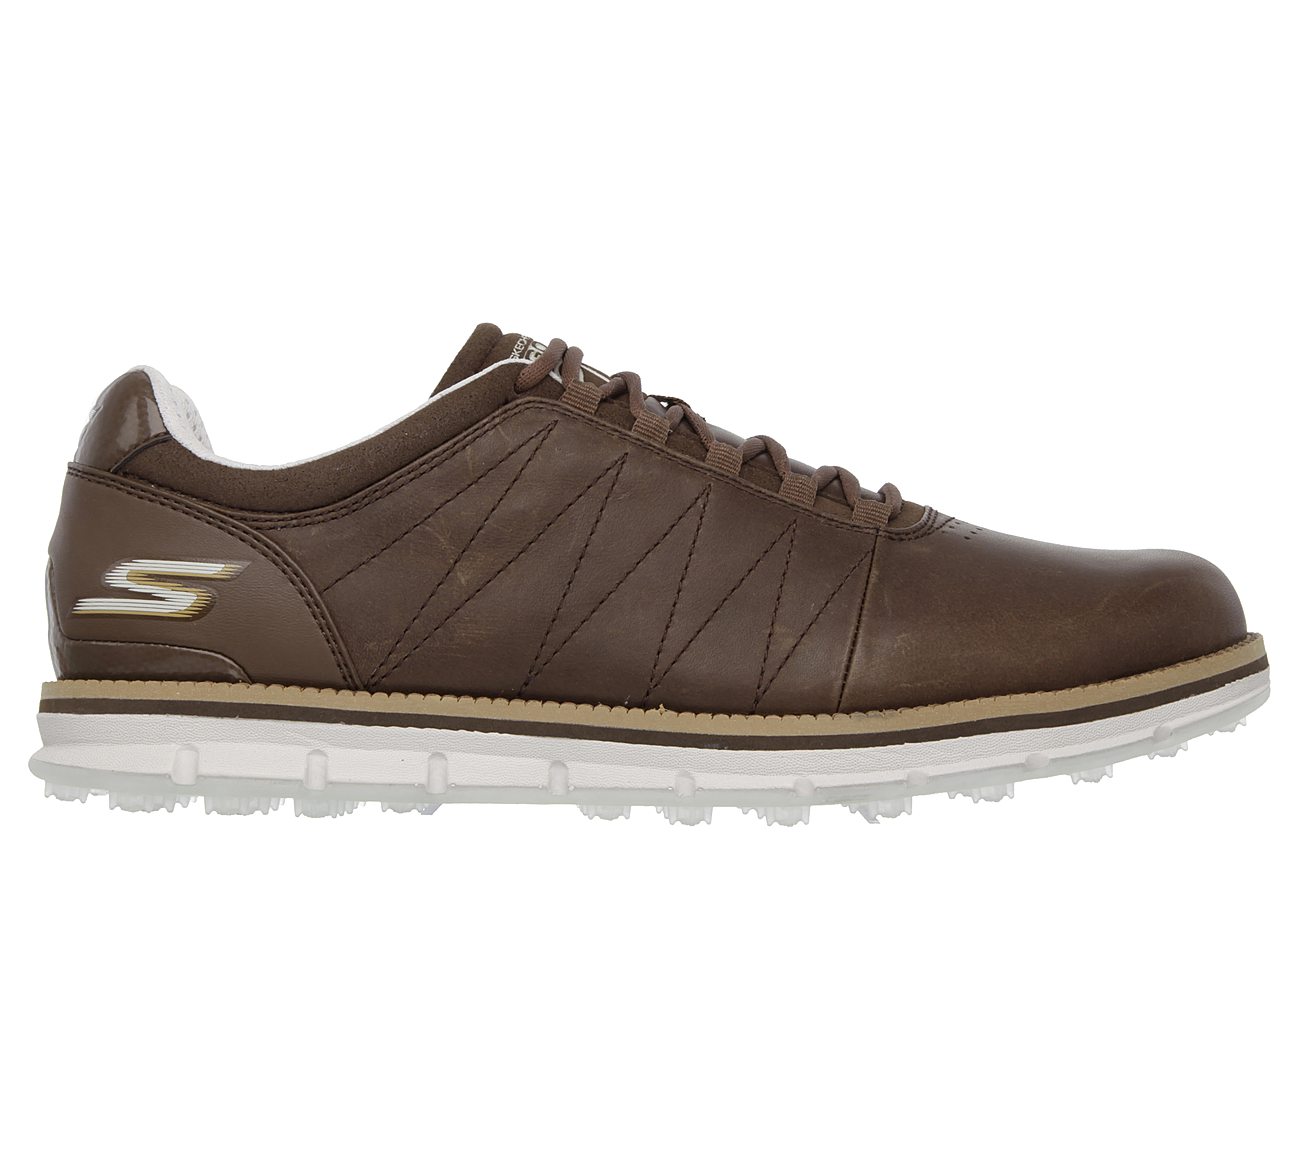 skechers wide fit golf shoes Sale,up to 